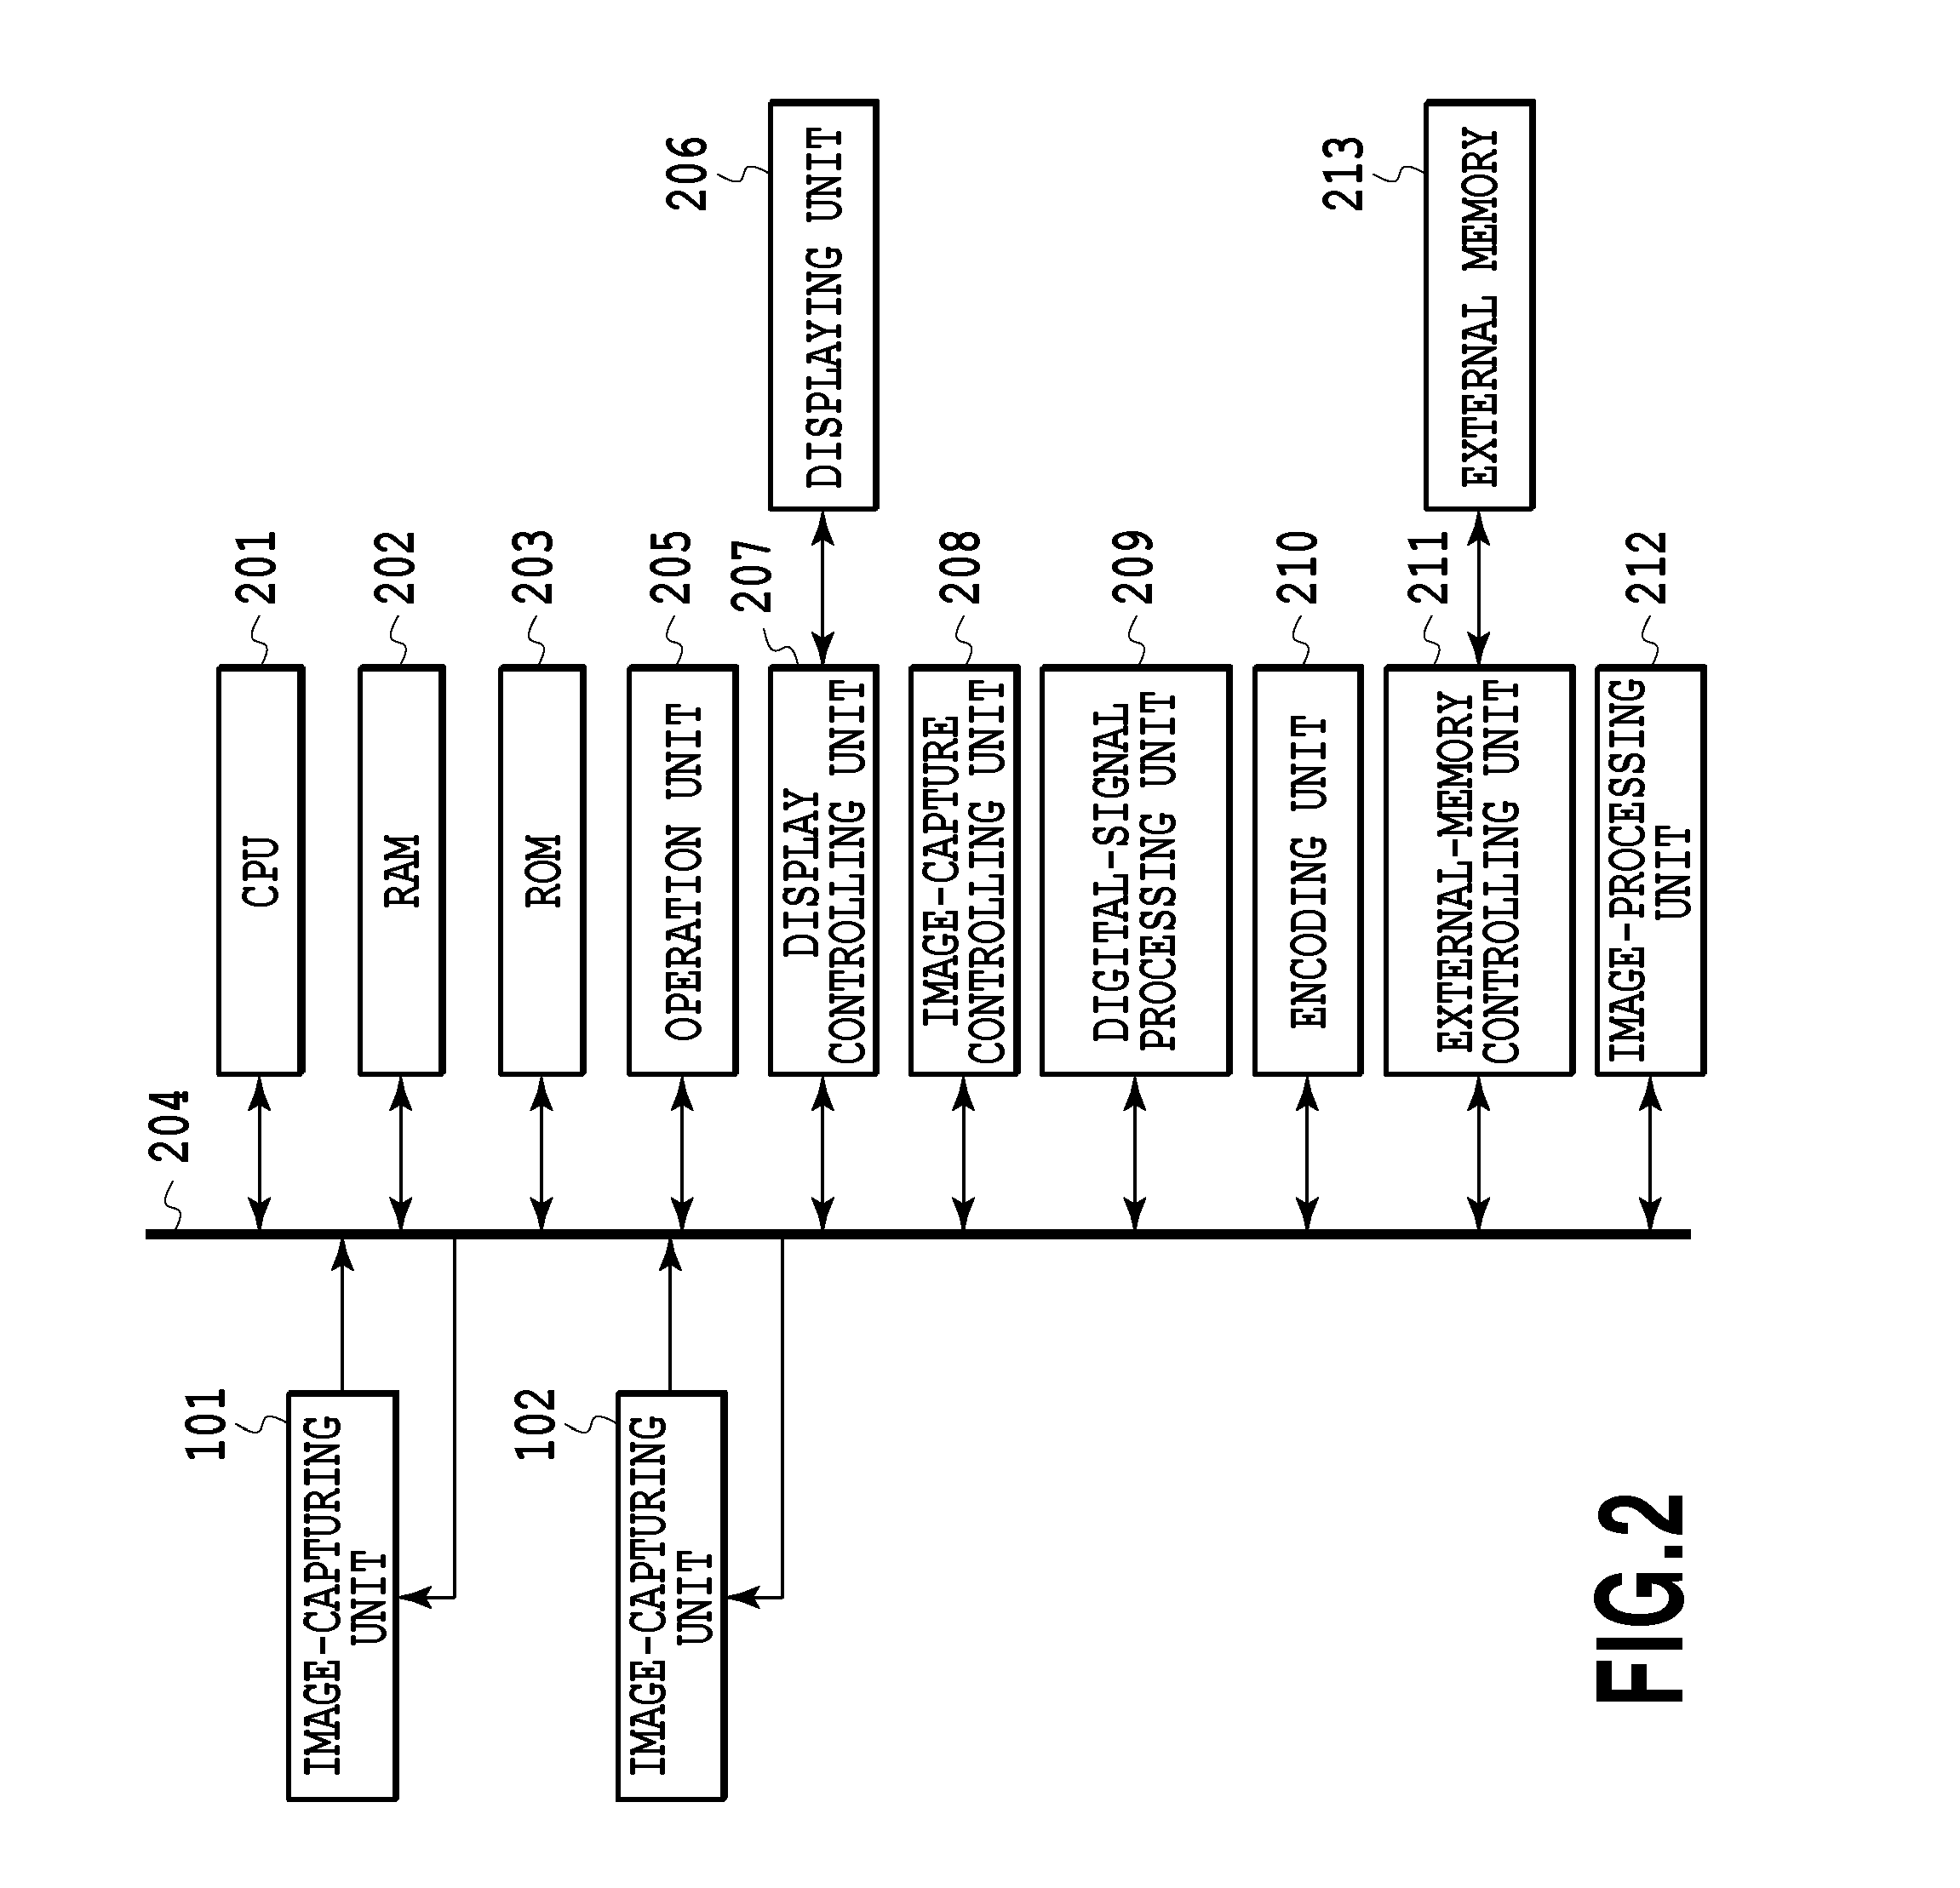 Image-processing apparatus and image-processing method for generating a virtual angle of view